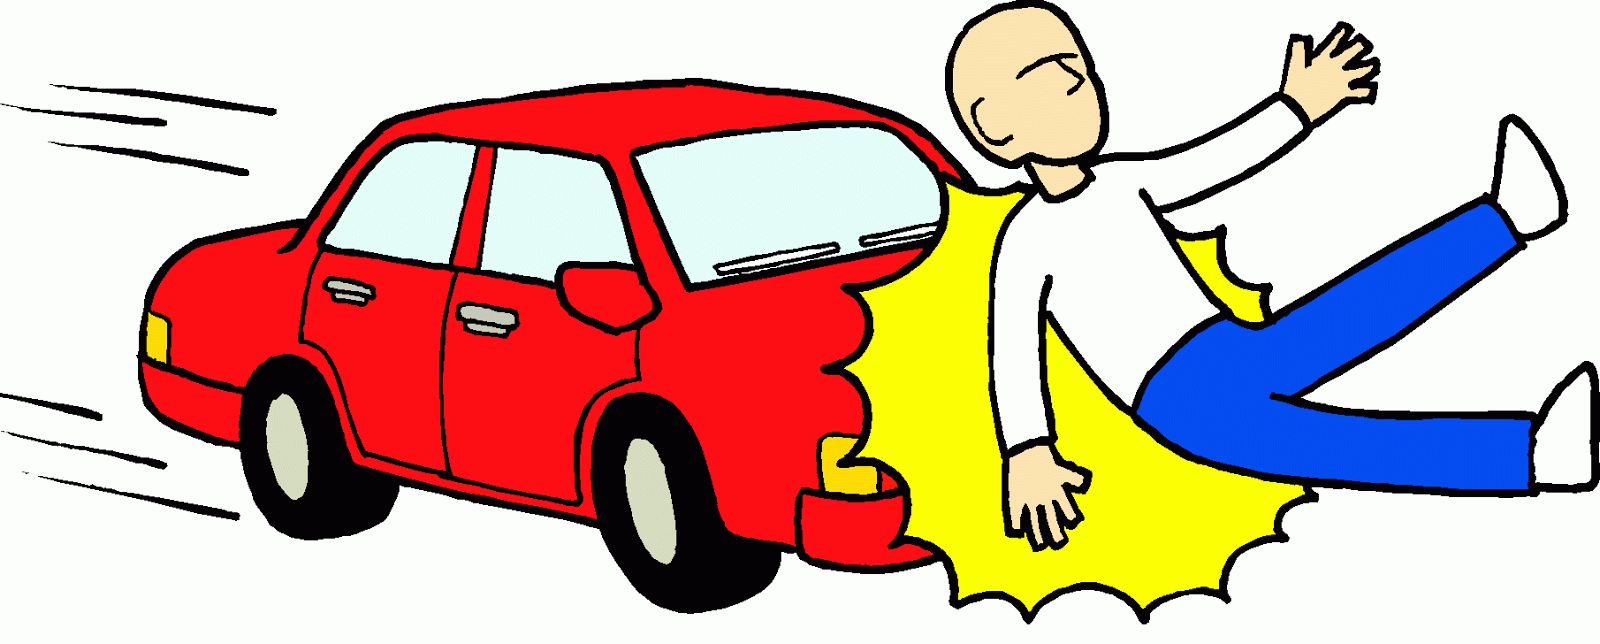 Road Accident Clipart Clip Art Library